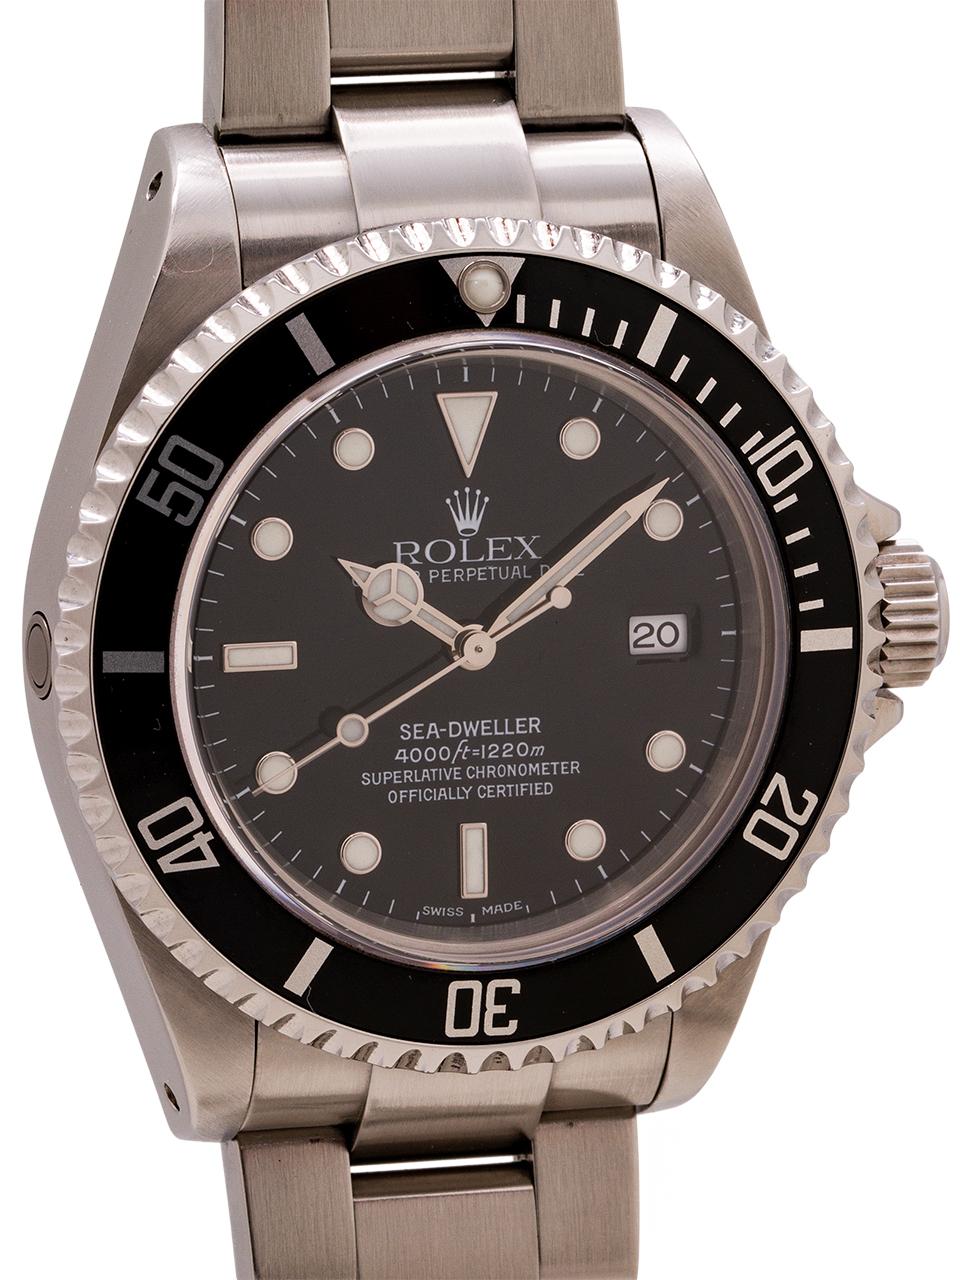 
Rolex Sea-Dweller ref 16600, Y serial# circa 2002. Featuring 40mm diameter stainless steel case with unidirectional elapsed time bezel and sapphire crystal. Original glossy black dial with luminova indexes and matching hands and original elapsed